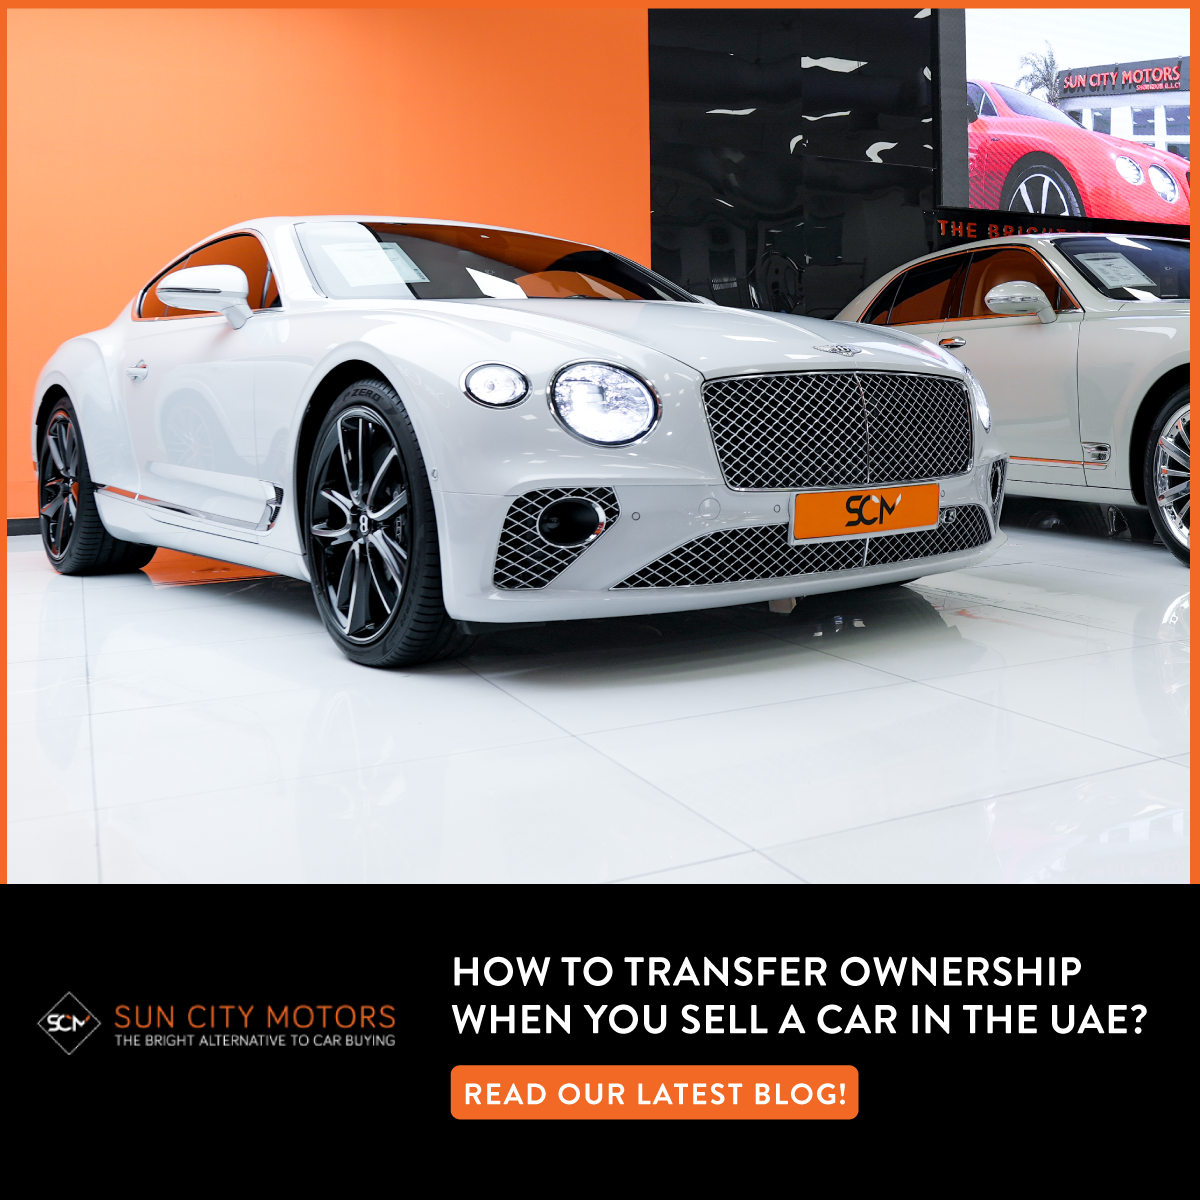 How to Transfer Ownership When You Sell a Car in the UAE?